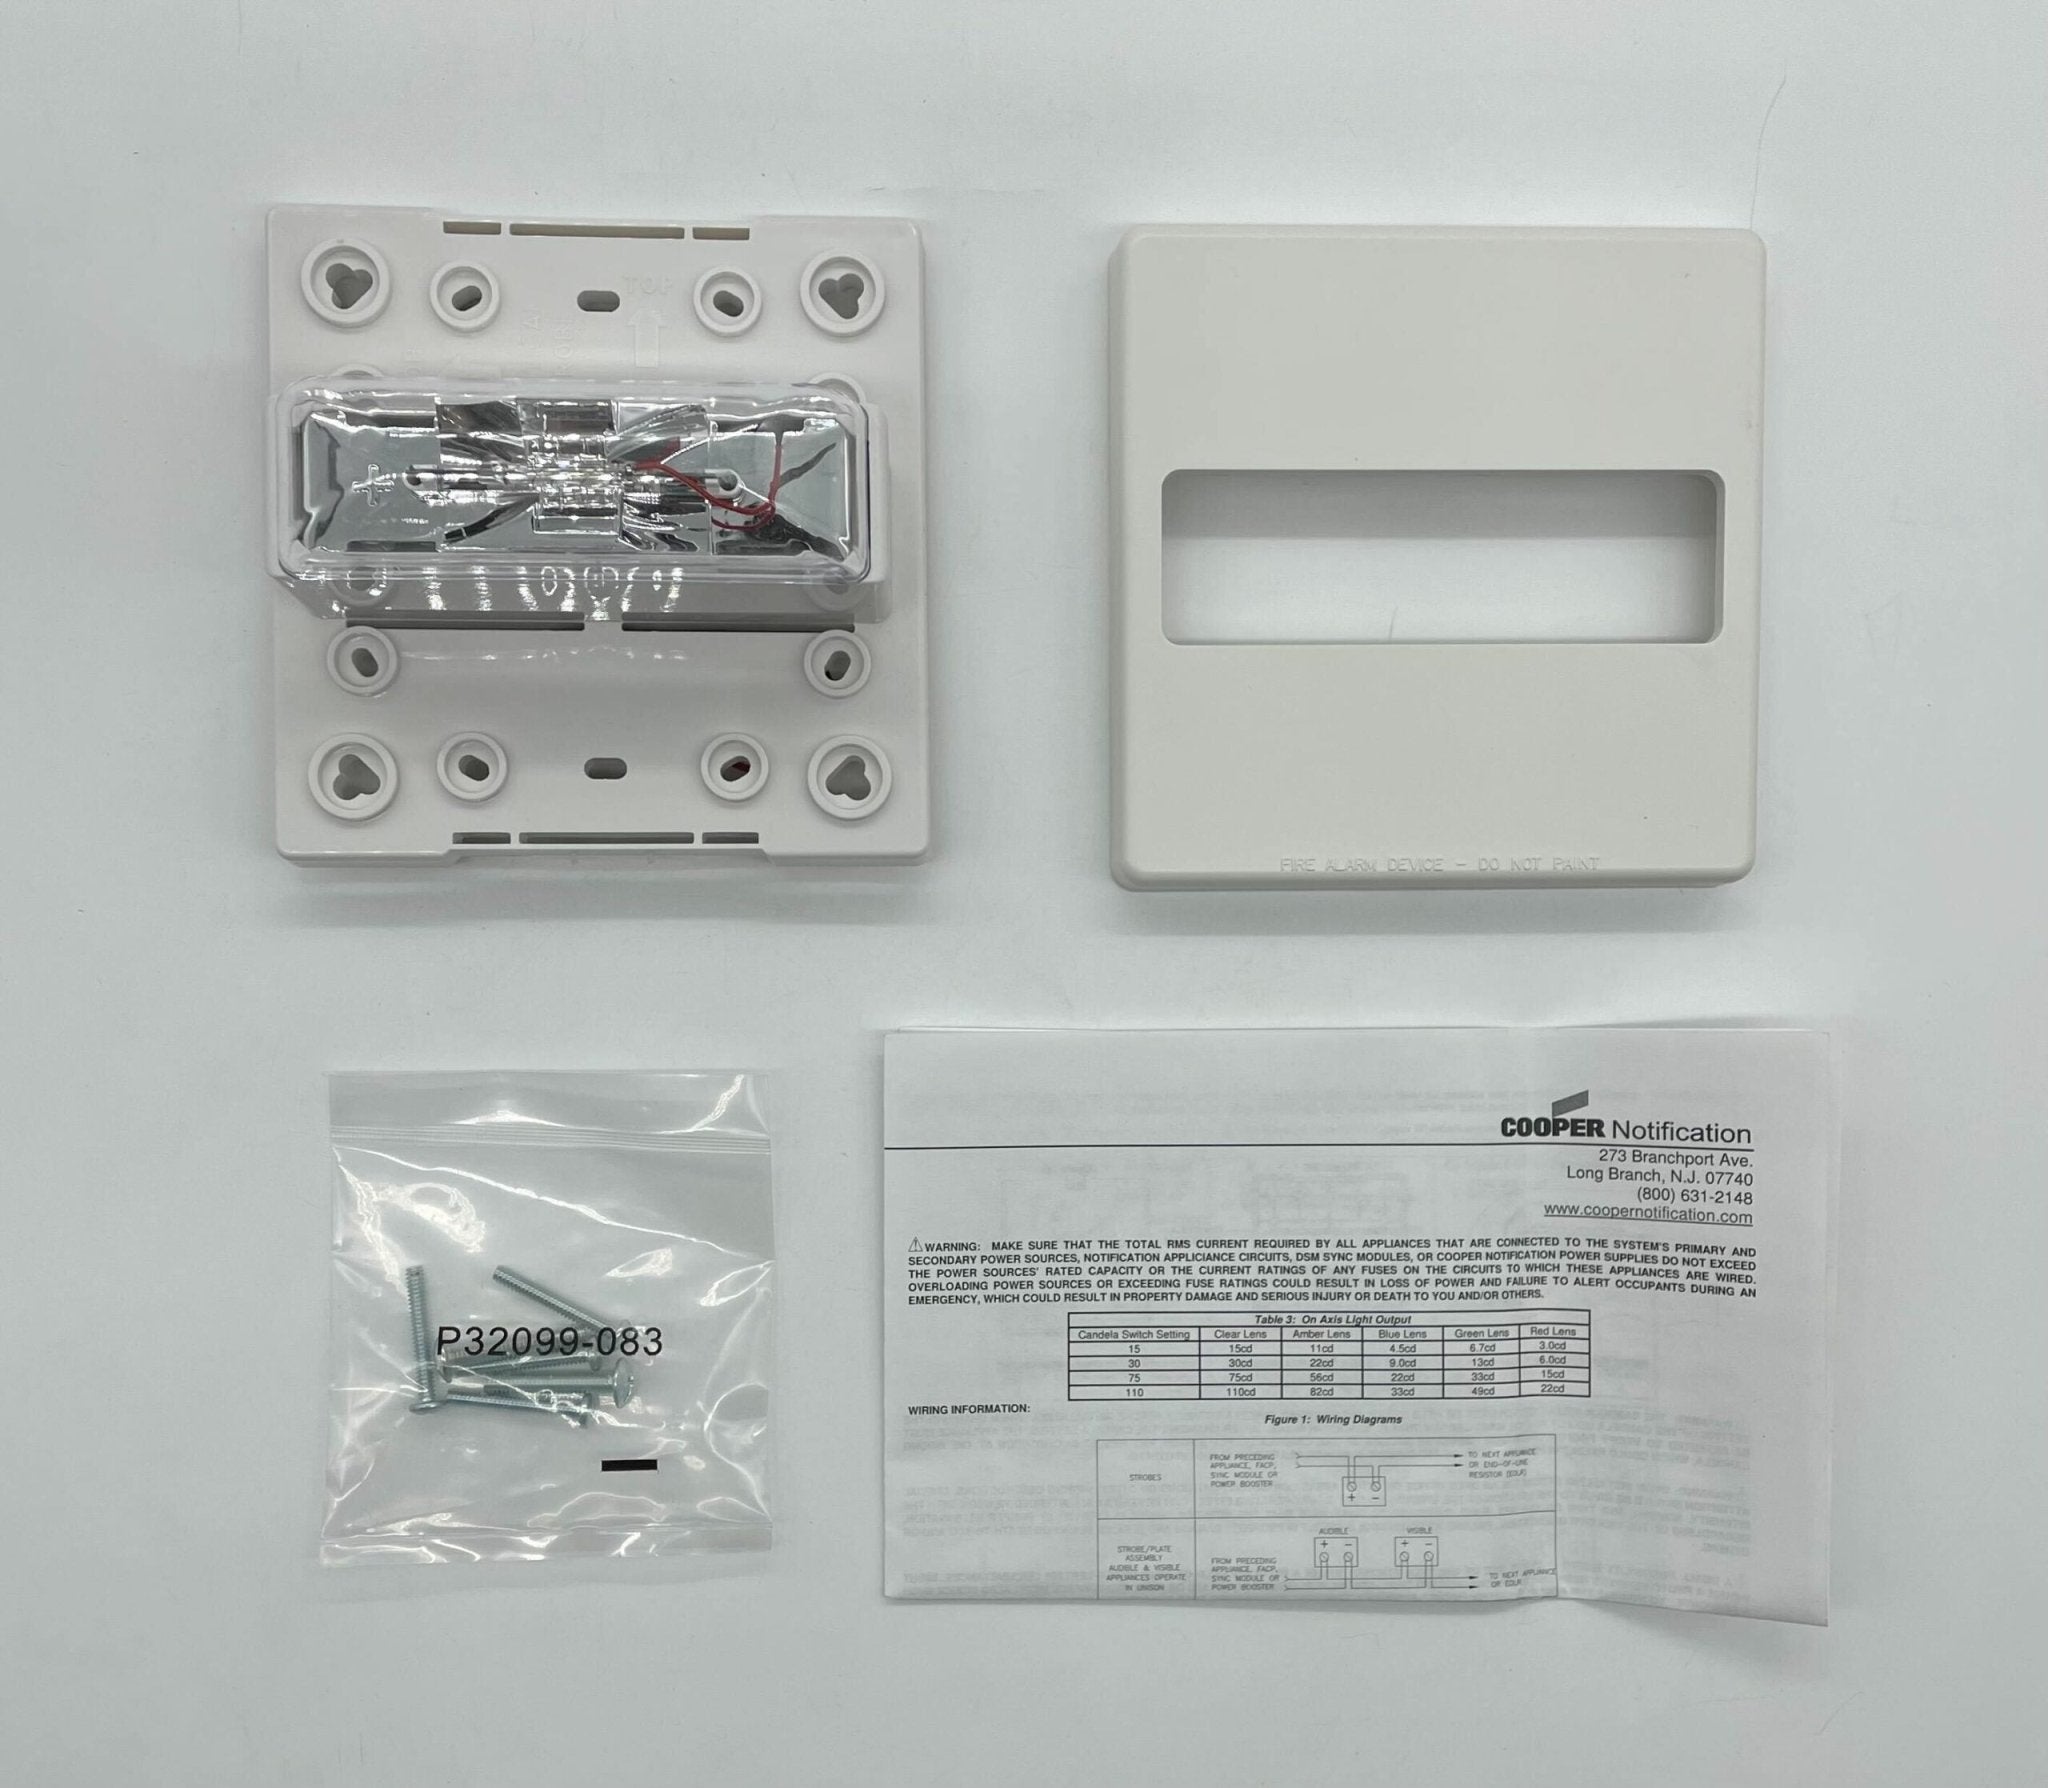 Wheelock RSS-24MCW-NW - The Fire Alarm Supplier